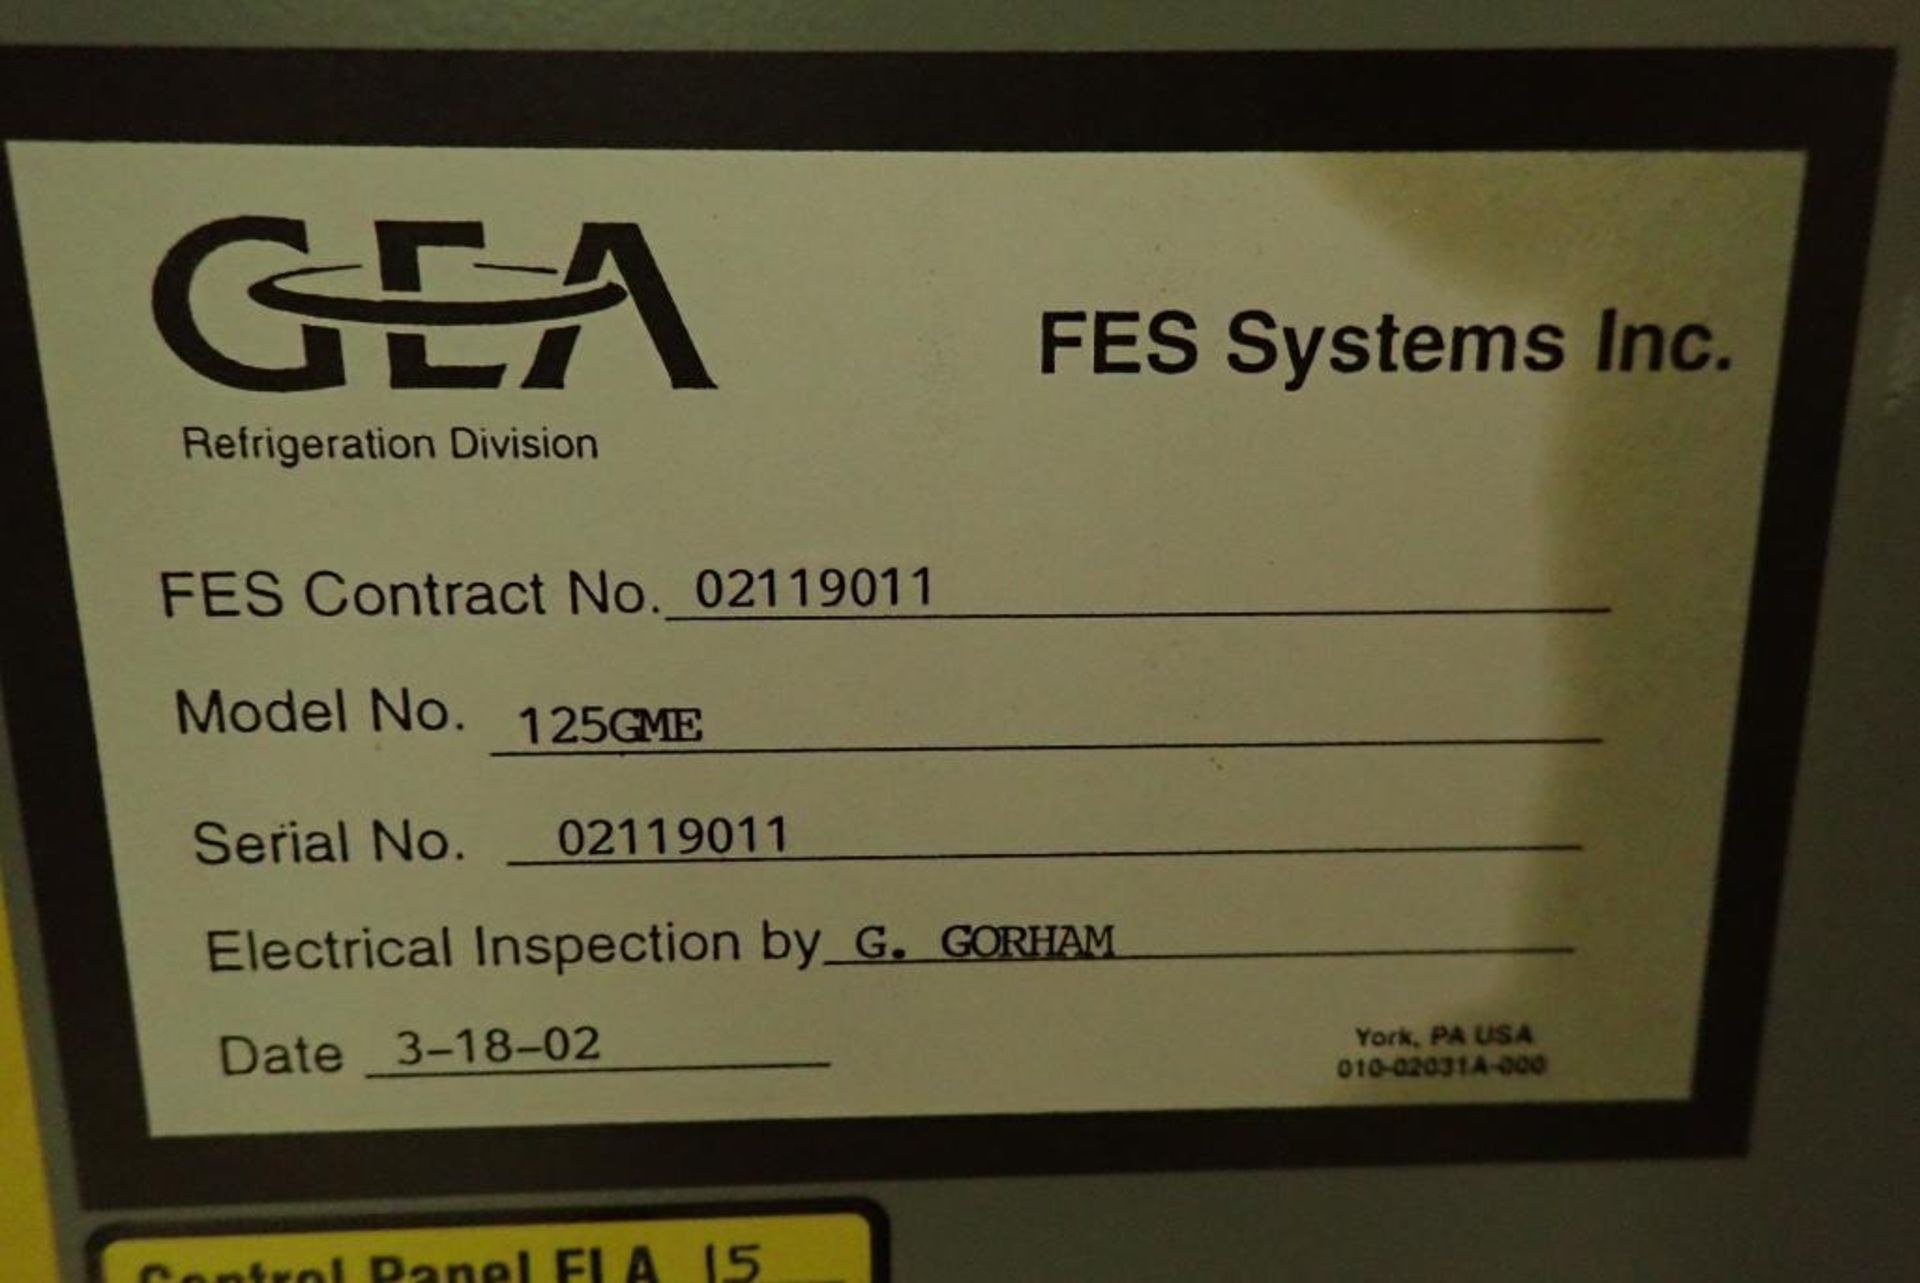 2002 Gea Fes Systems ammonia compressor - Image 19 of 19